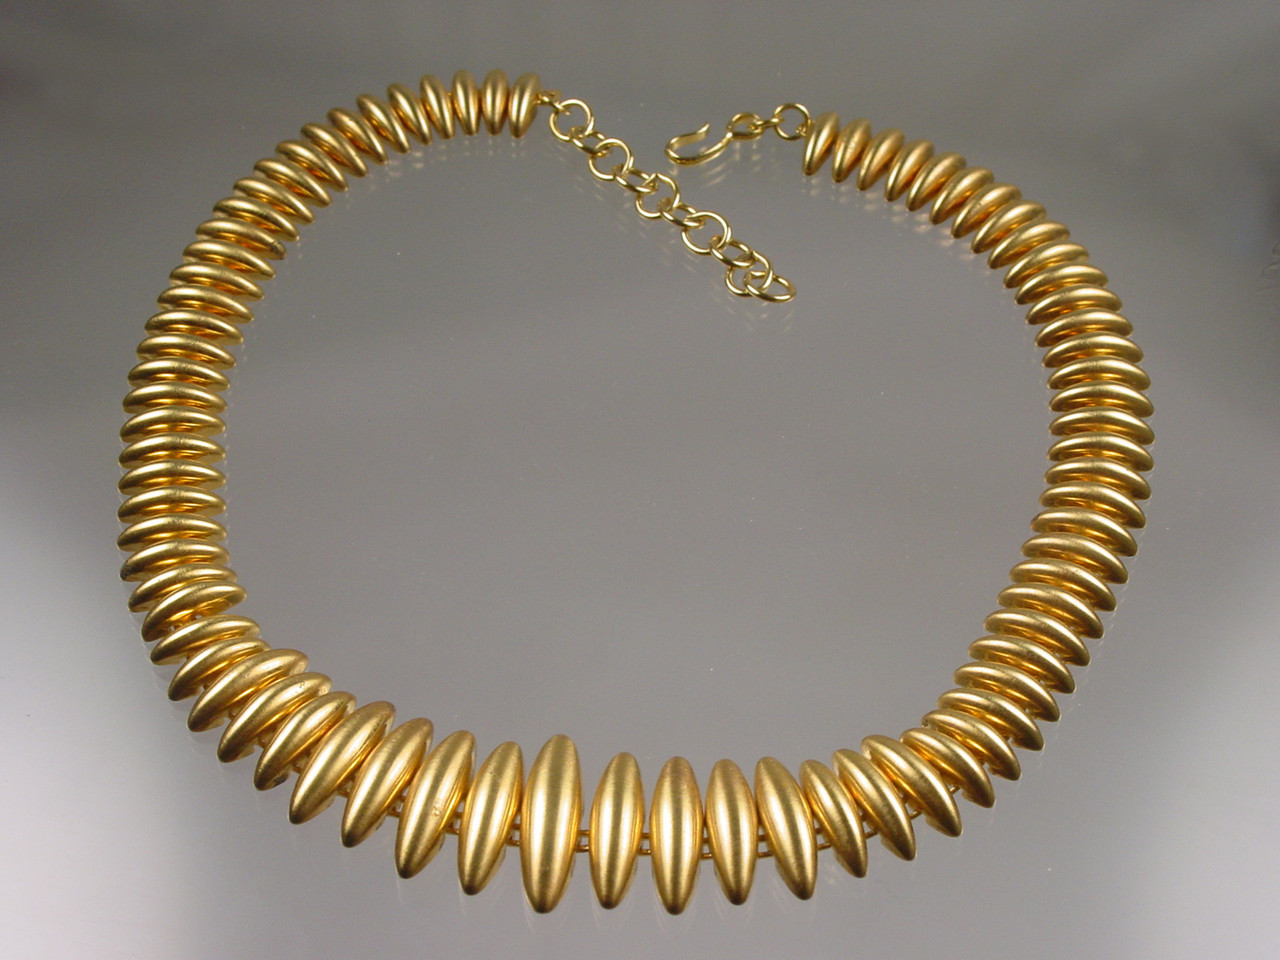 Designer by Monet, necklace, 36 inch gold tone chain links. | TheLadyJeweler